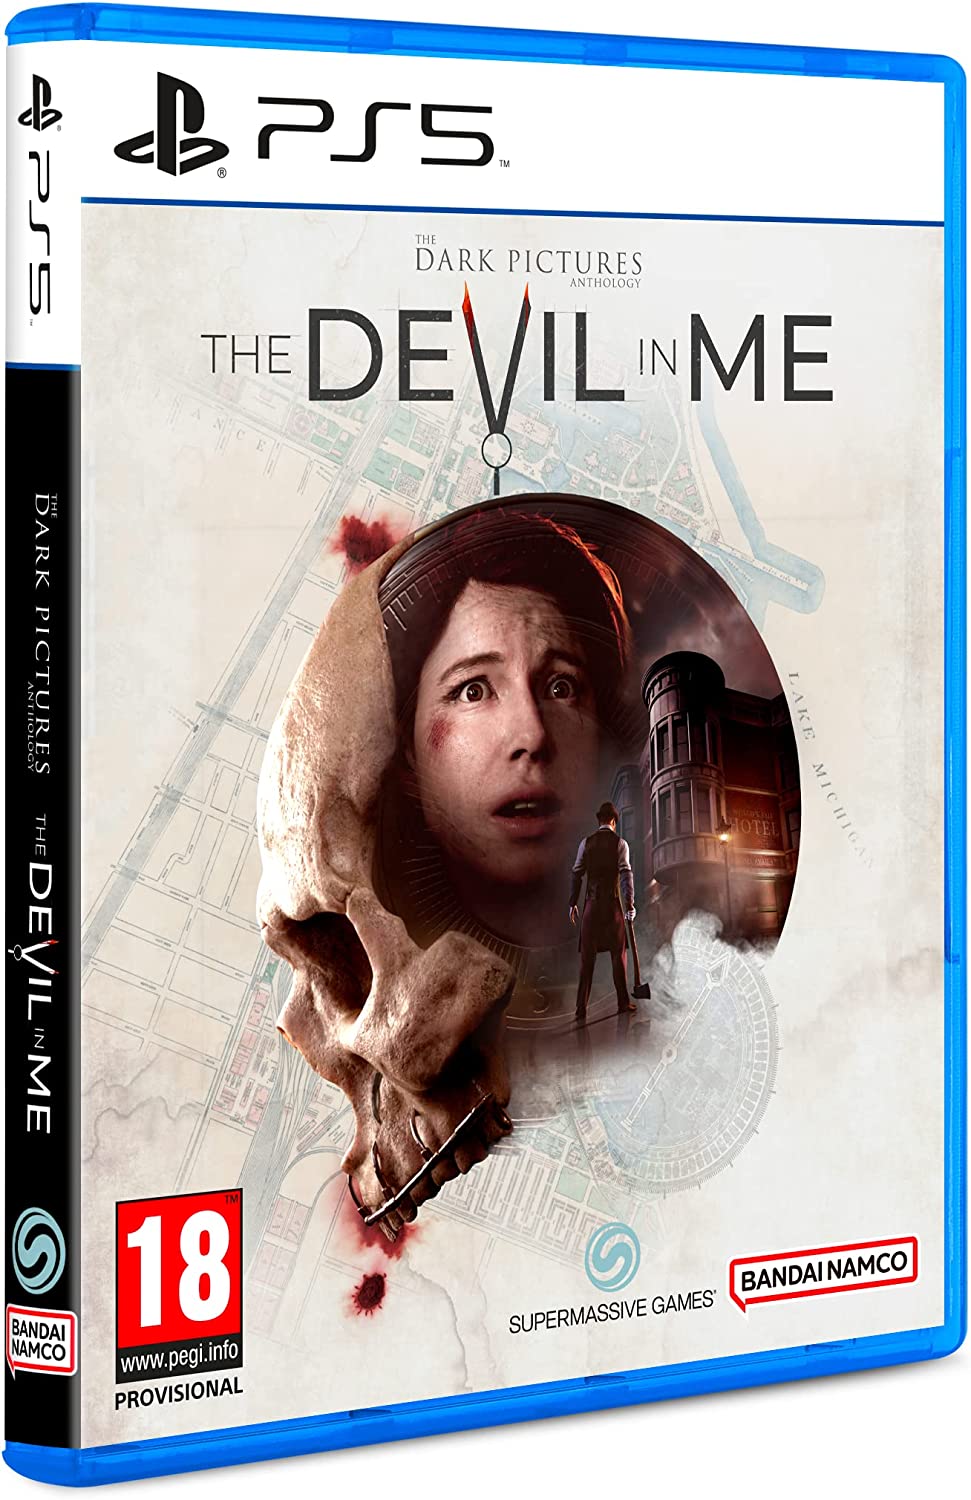 SONY PS5 GAME THE DARK PICTURES ANTHOLOGY: THE DEVIL IN ME